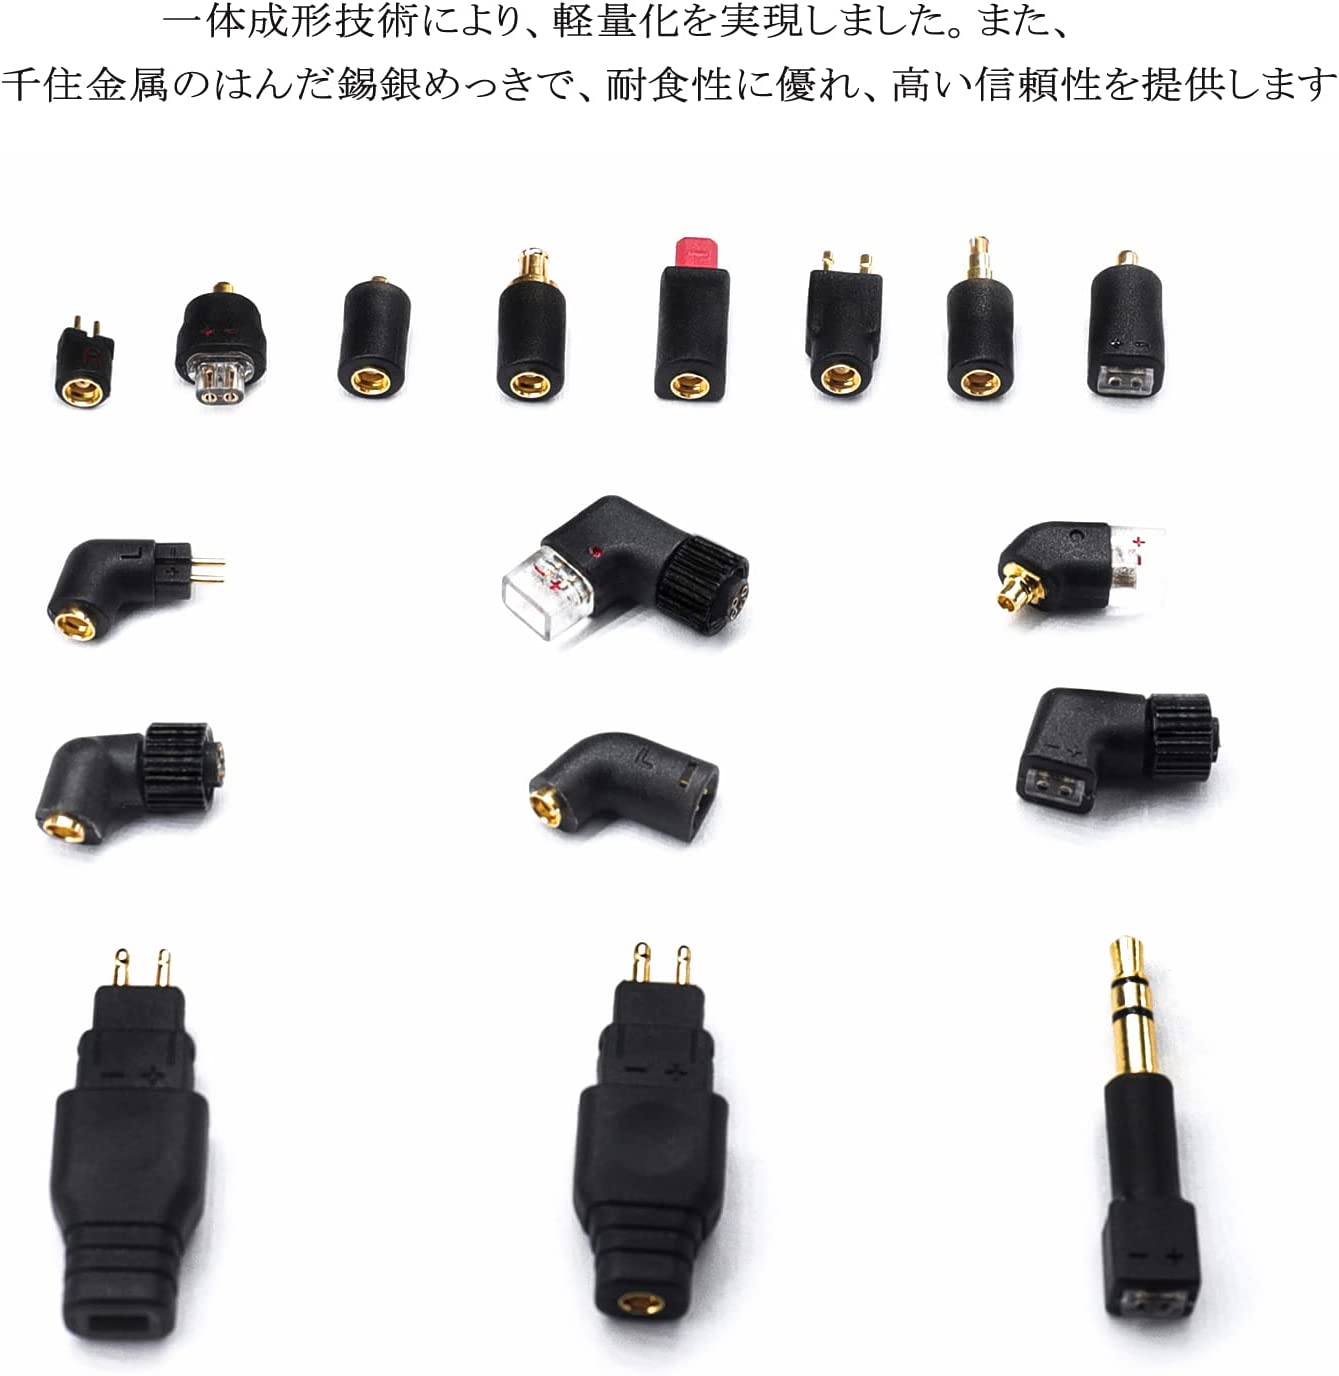 cooyin IE80-MMCX 変換コネクター コネクターキット 2Pinコネクタ IE80用（オス） - MMCXコネクター（メス） Sennheiser用 IE80 IE8 IE8iに適合する 2個セット L型